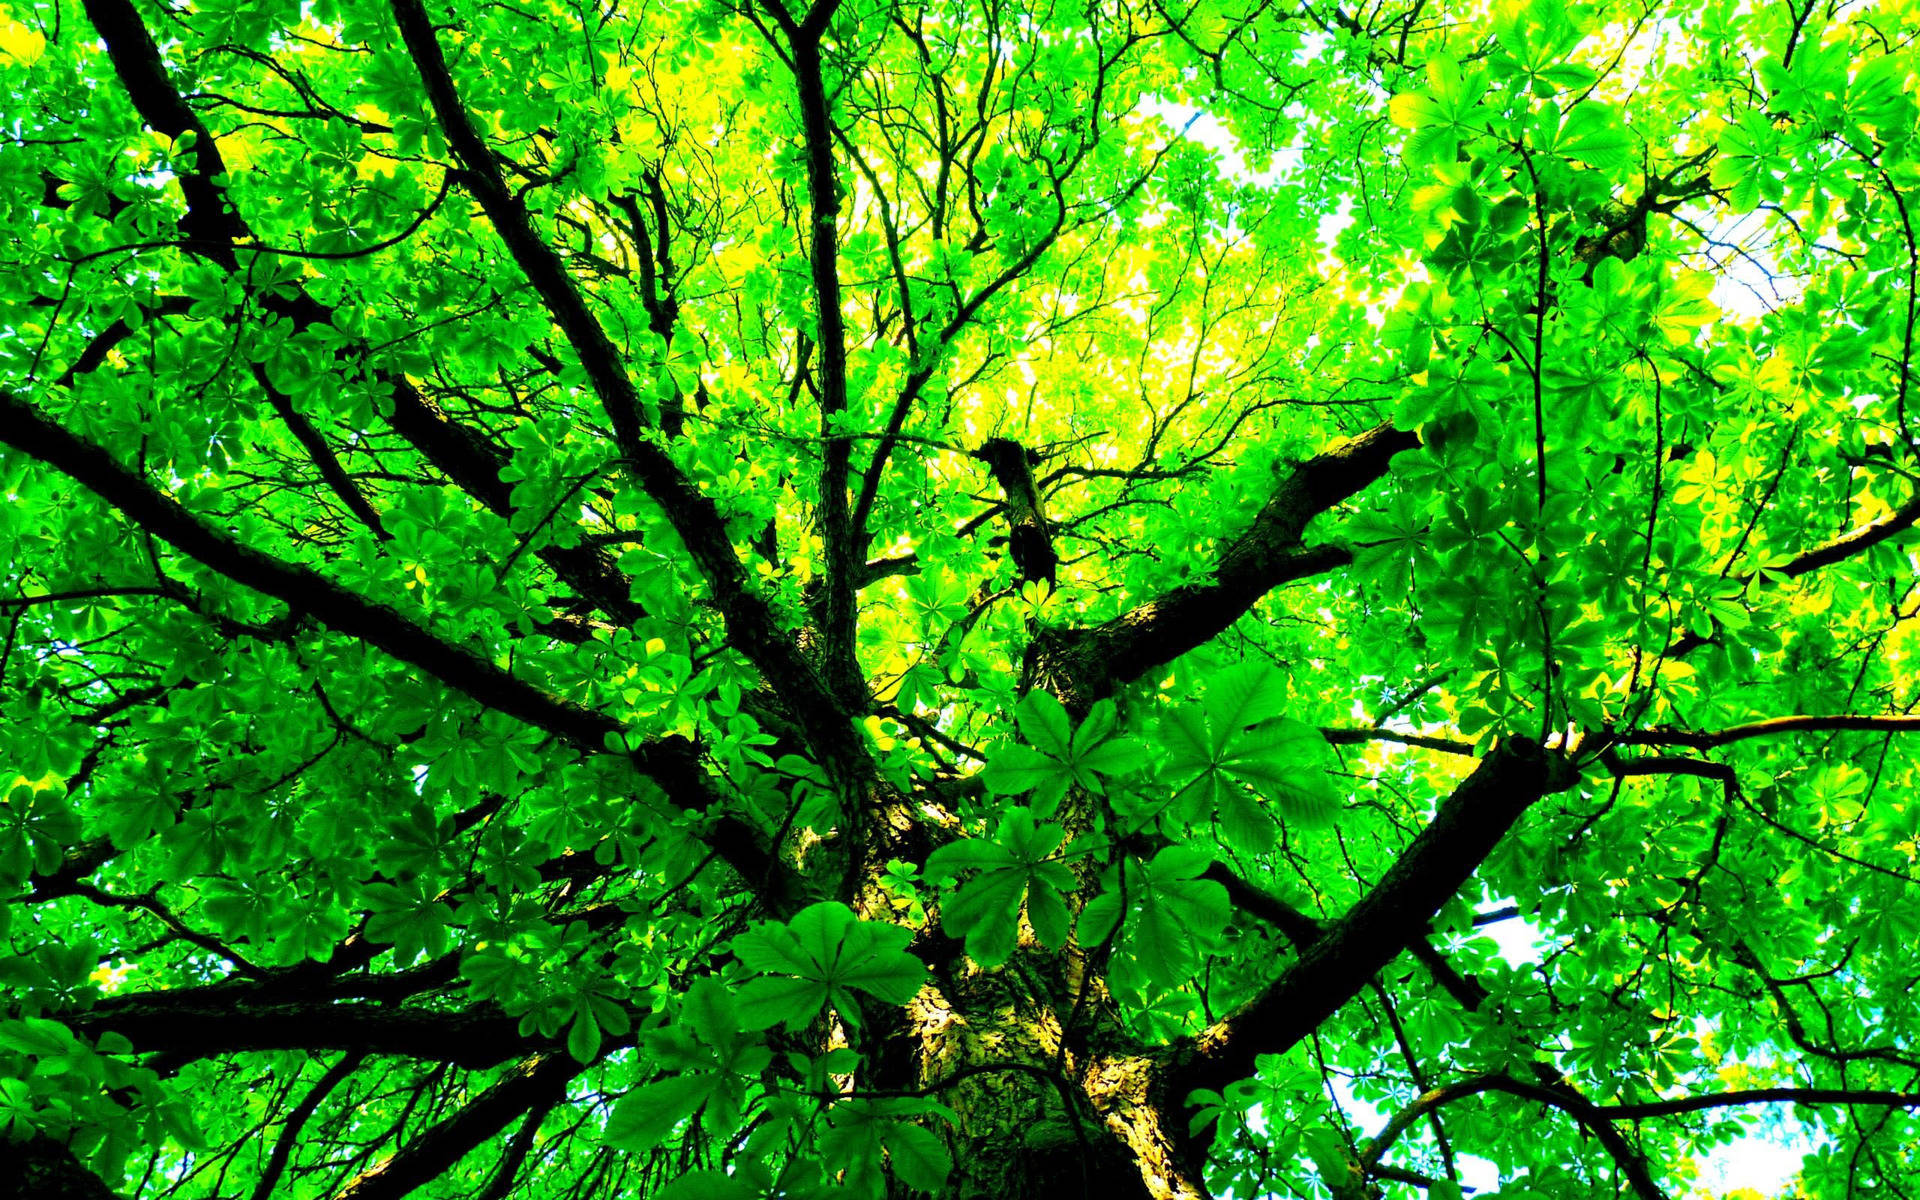 Free Green Tree Wallpaper Downloads, [100+] Green Tree Wallpapers for FREE  